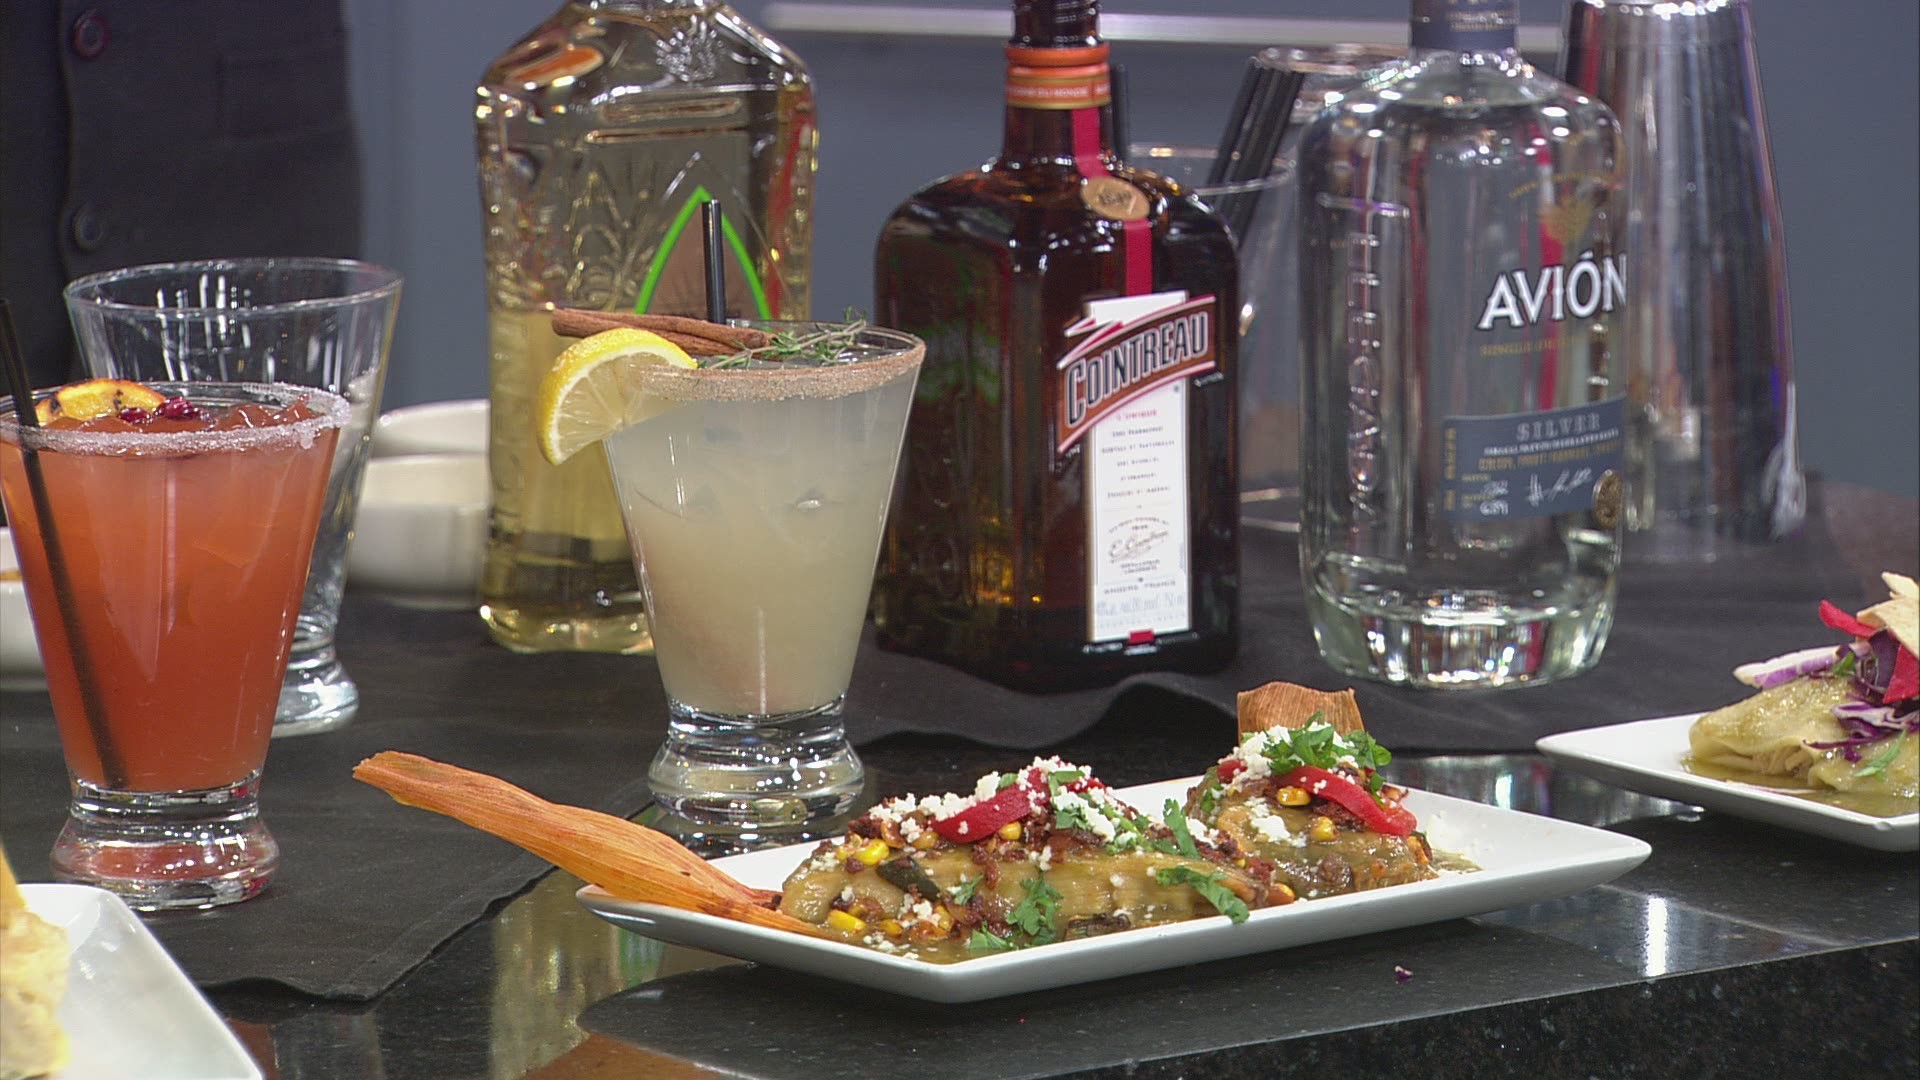 Part of a Mexican holiday tradition, the tamales are paired with holiday-themed margaritas.